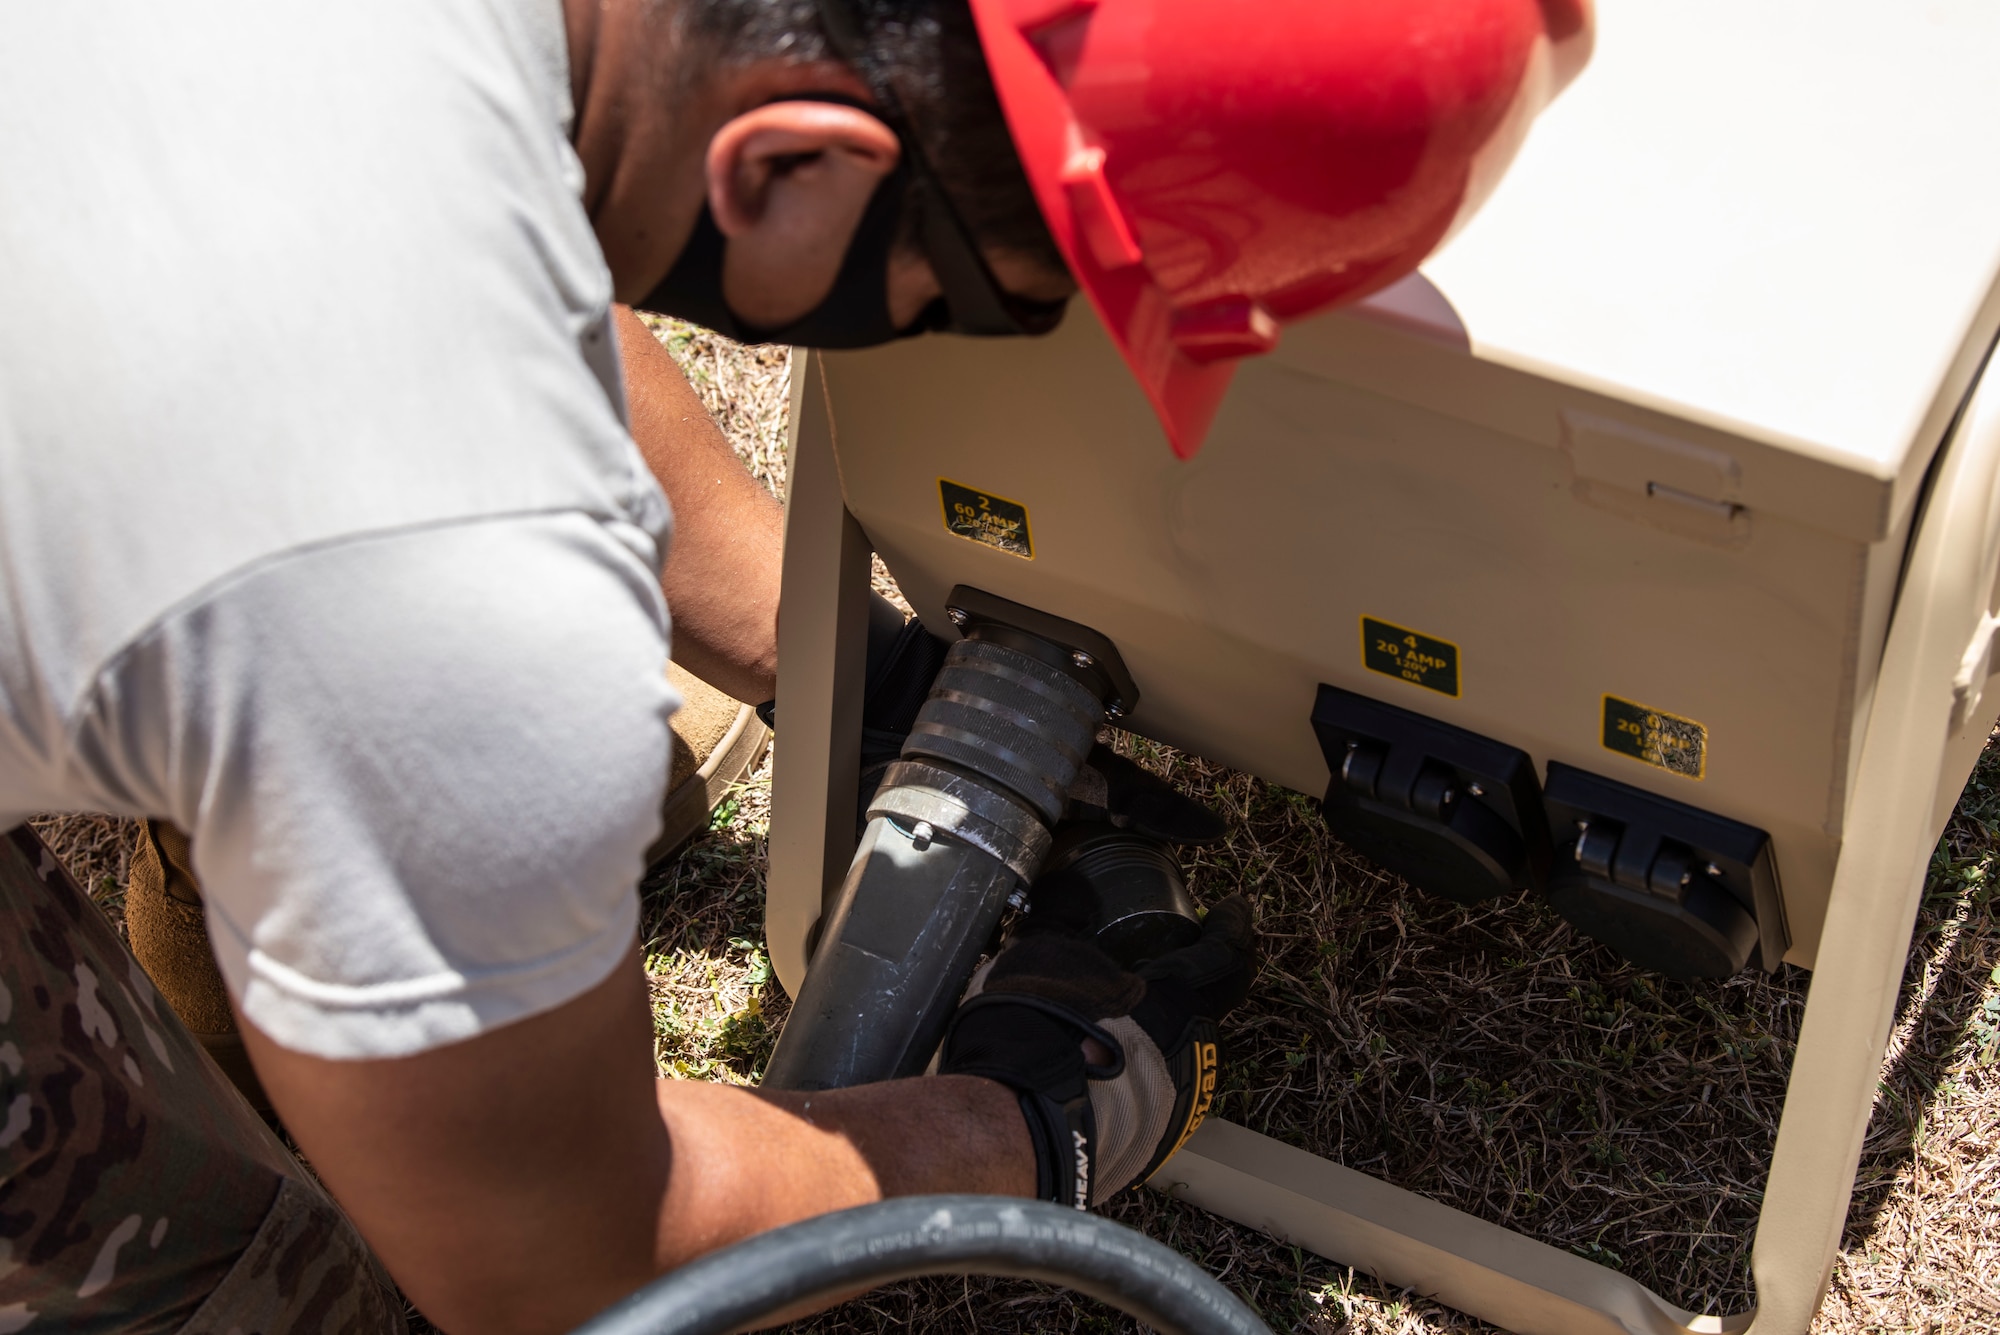 An Airman from the 554th RED HORSE Squadron readies a generator for a temporary warehouse unit as part of the construction of an Expeditionary Medical Support System facility April 13, 2020, at U.S. Naval Hospital Guam.